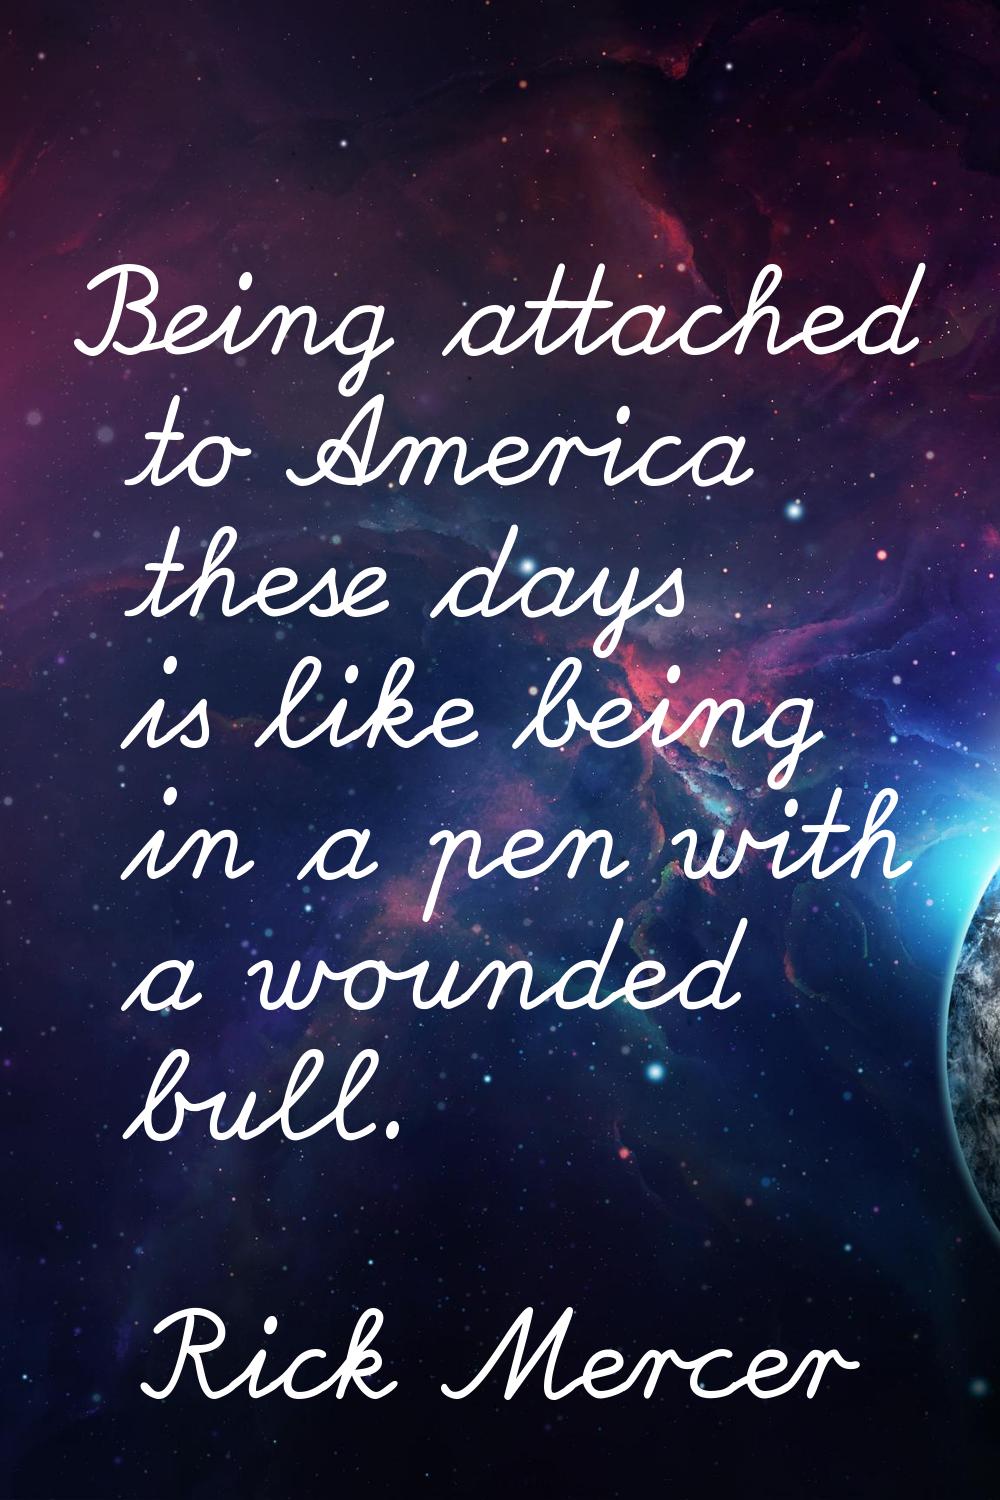 Being attached to America these days is like being in a pen with a wounded bull.